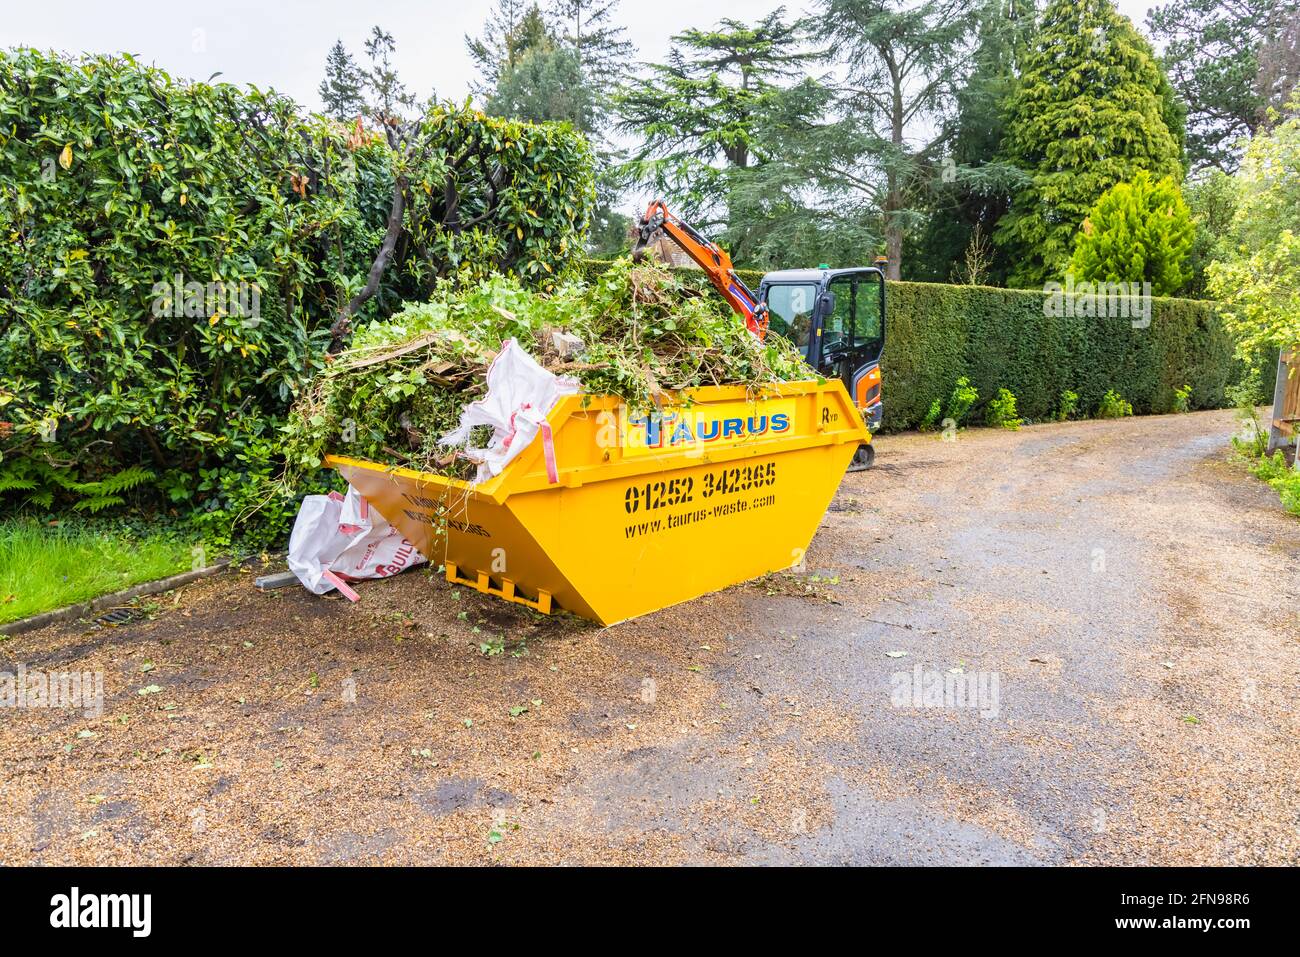 A large 8 ft overfilled yellow skip used for garden clearance and debris removal, full of garden waste in a garden in Surrey, south-east England Stock Photo